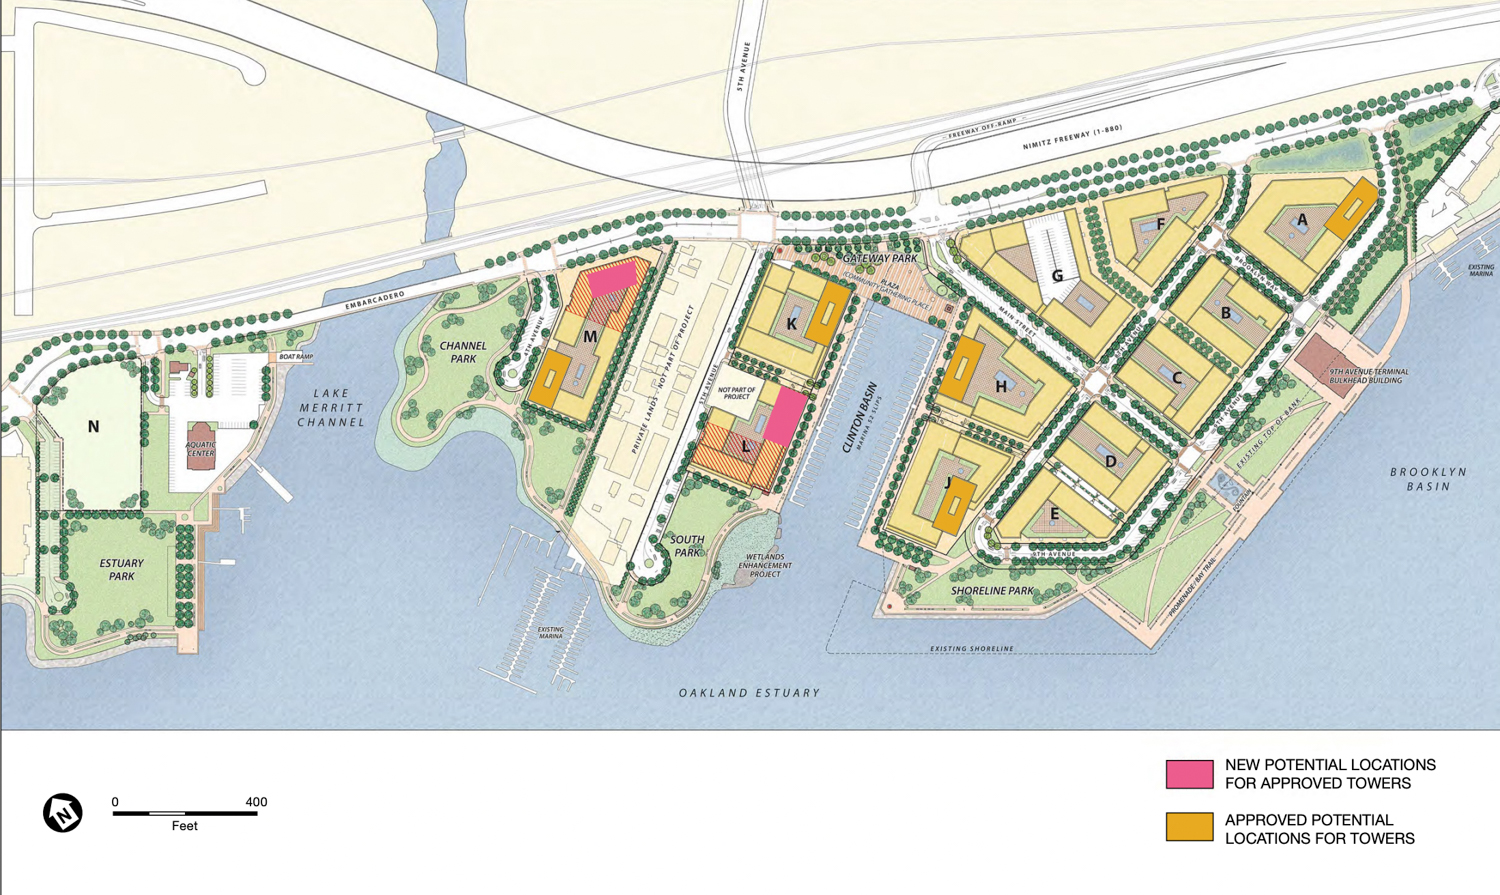 Brooklyn Basin new site map, image via planning documents